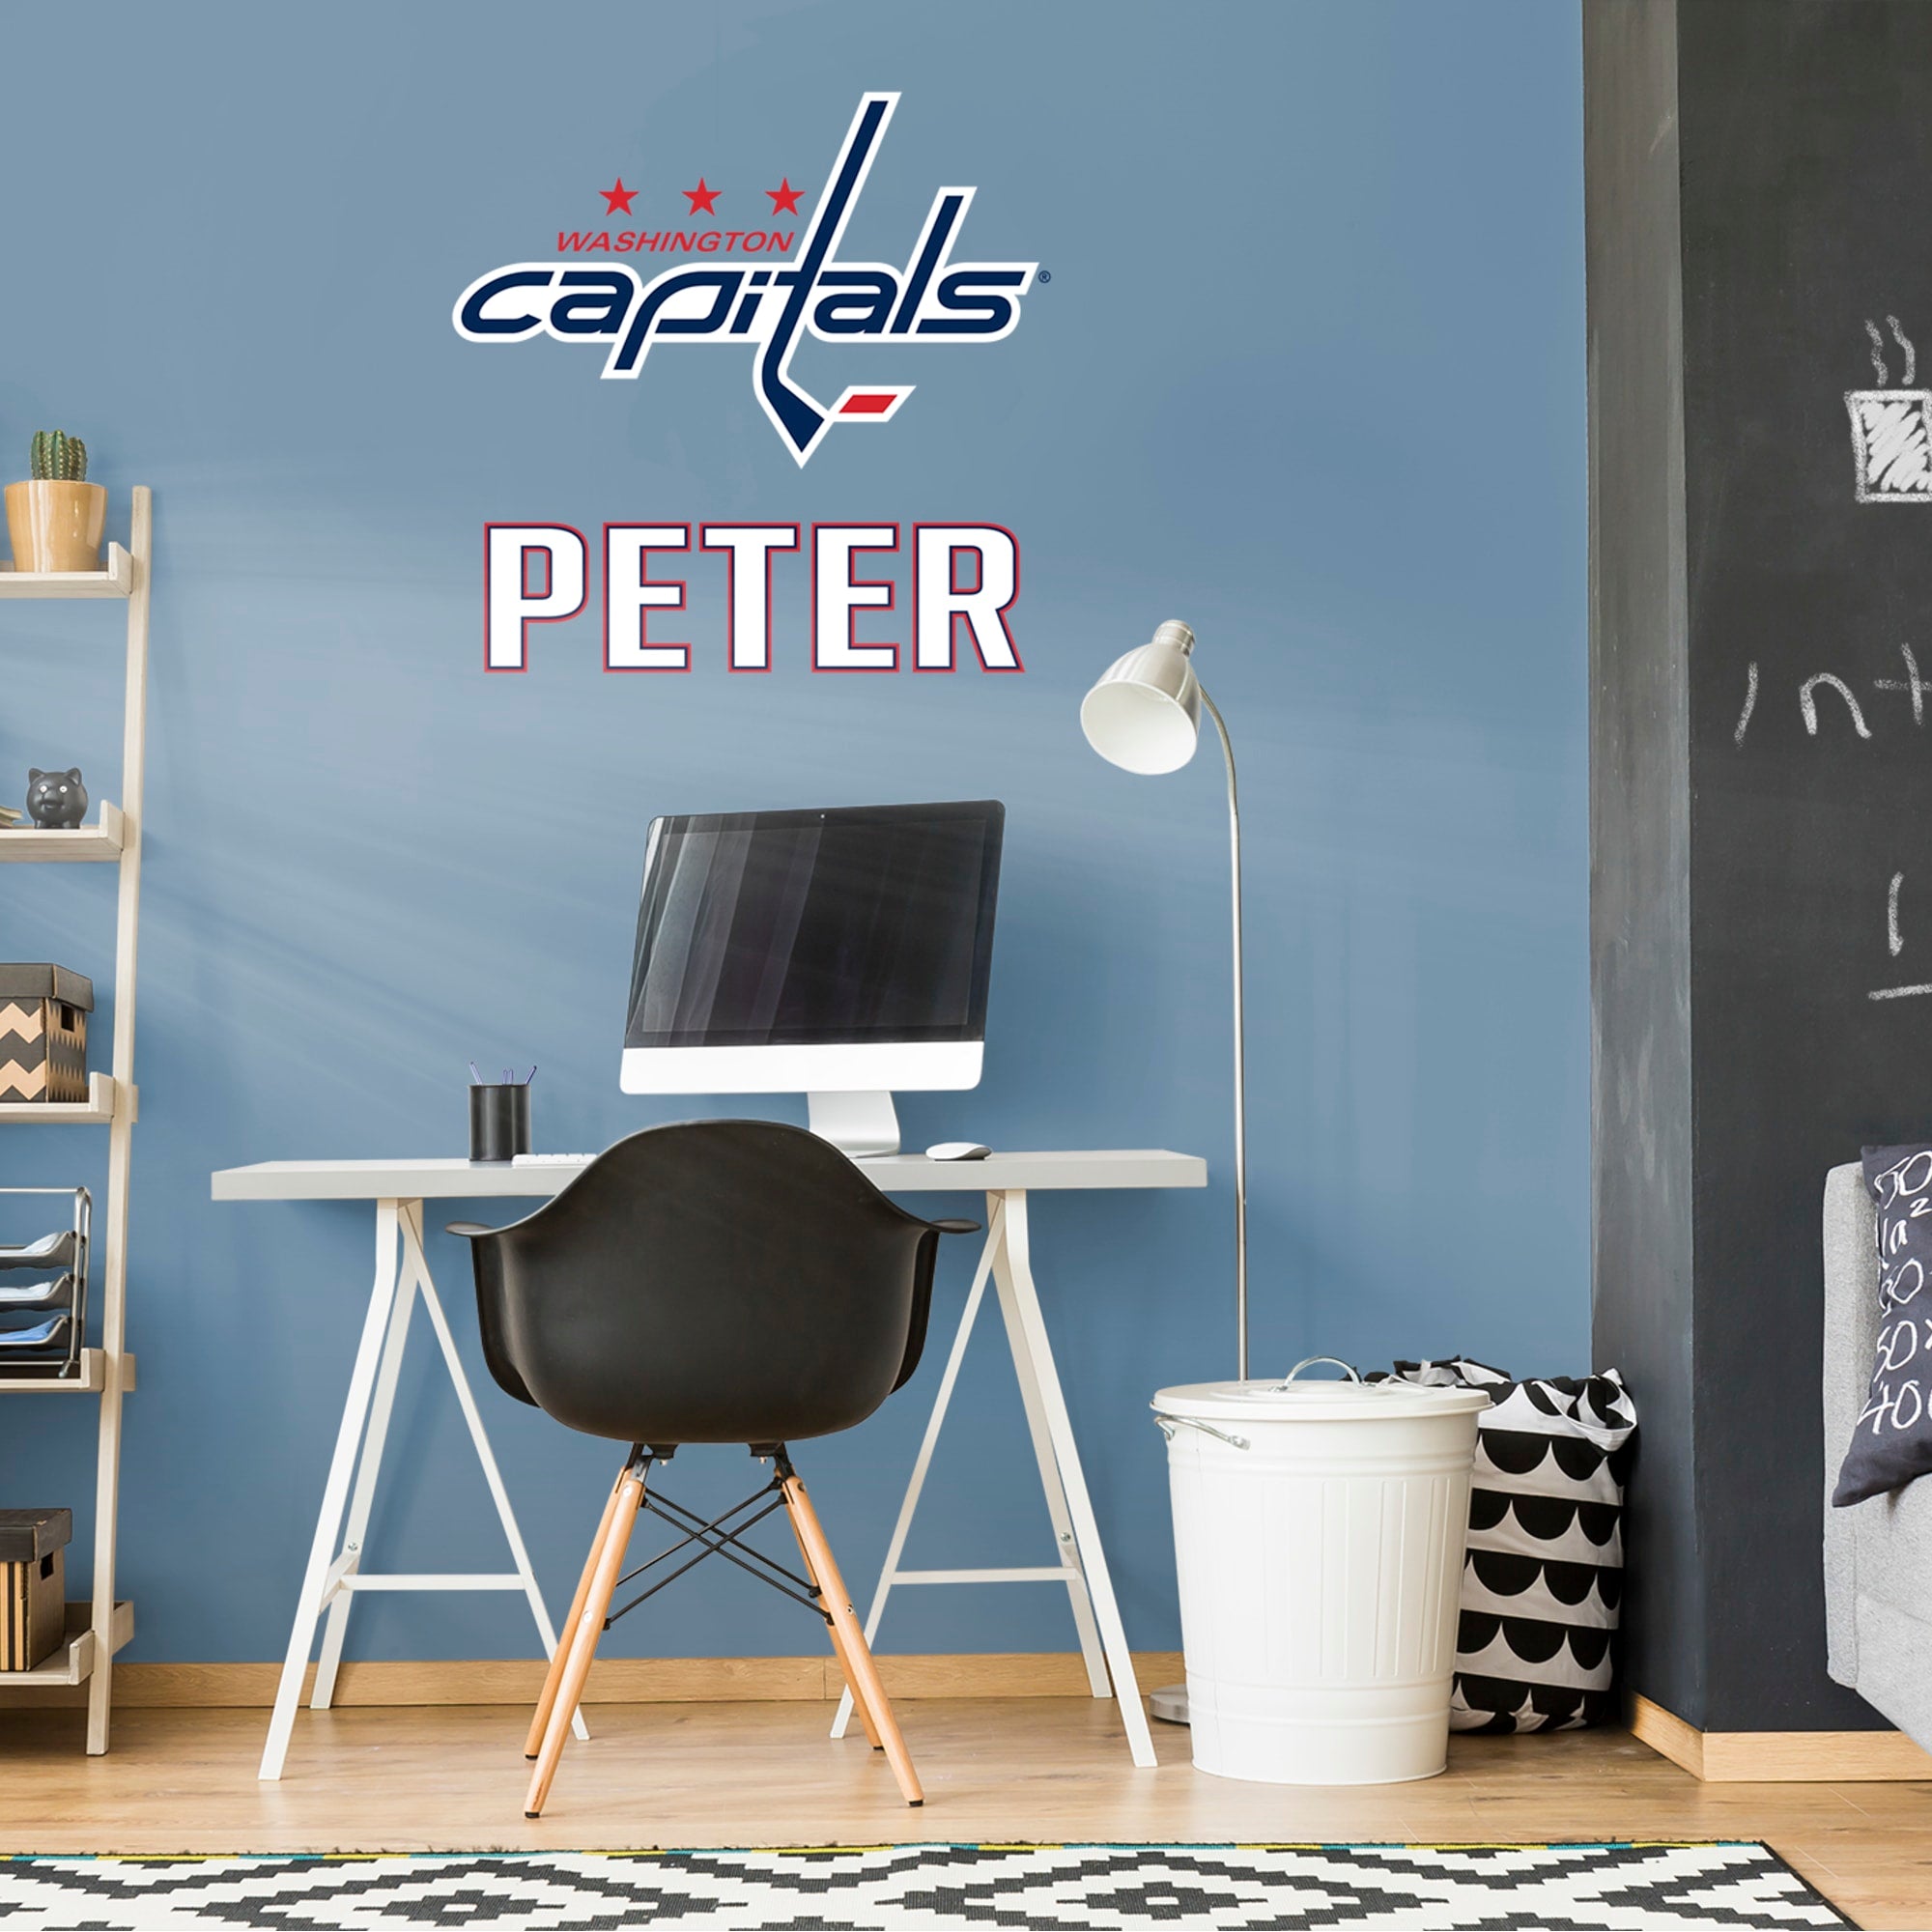 Washington Capitals: Stacked Personalized Name - Officially Licensed NHL Transfer Decal in Navy/White (39.5"W x 52"H) by Fathead